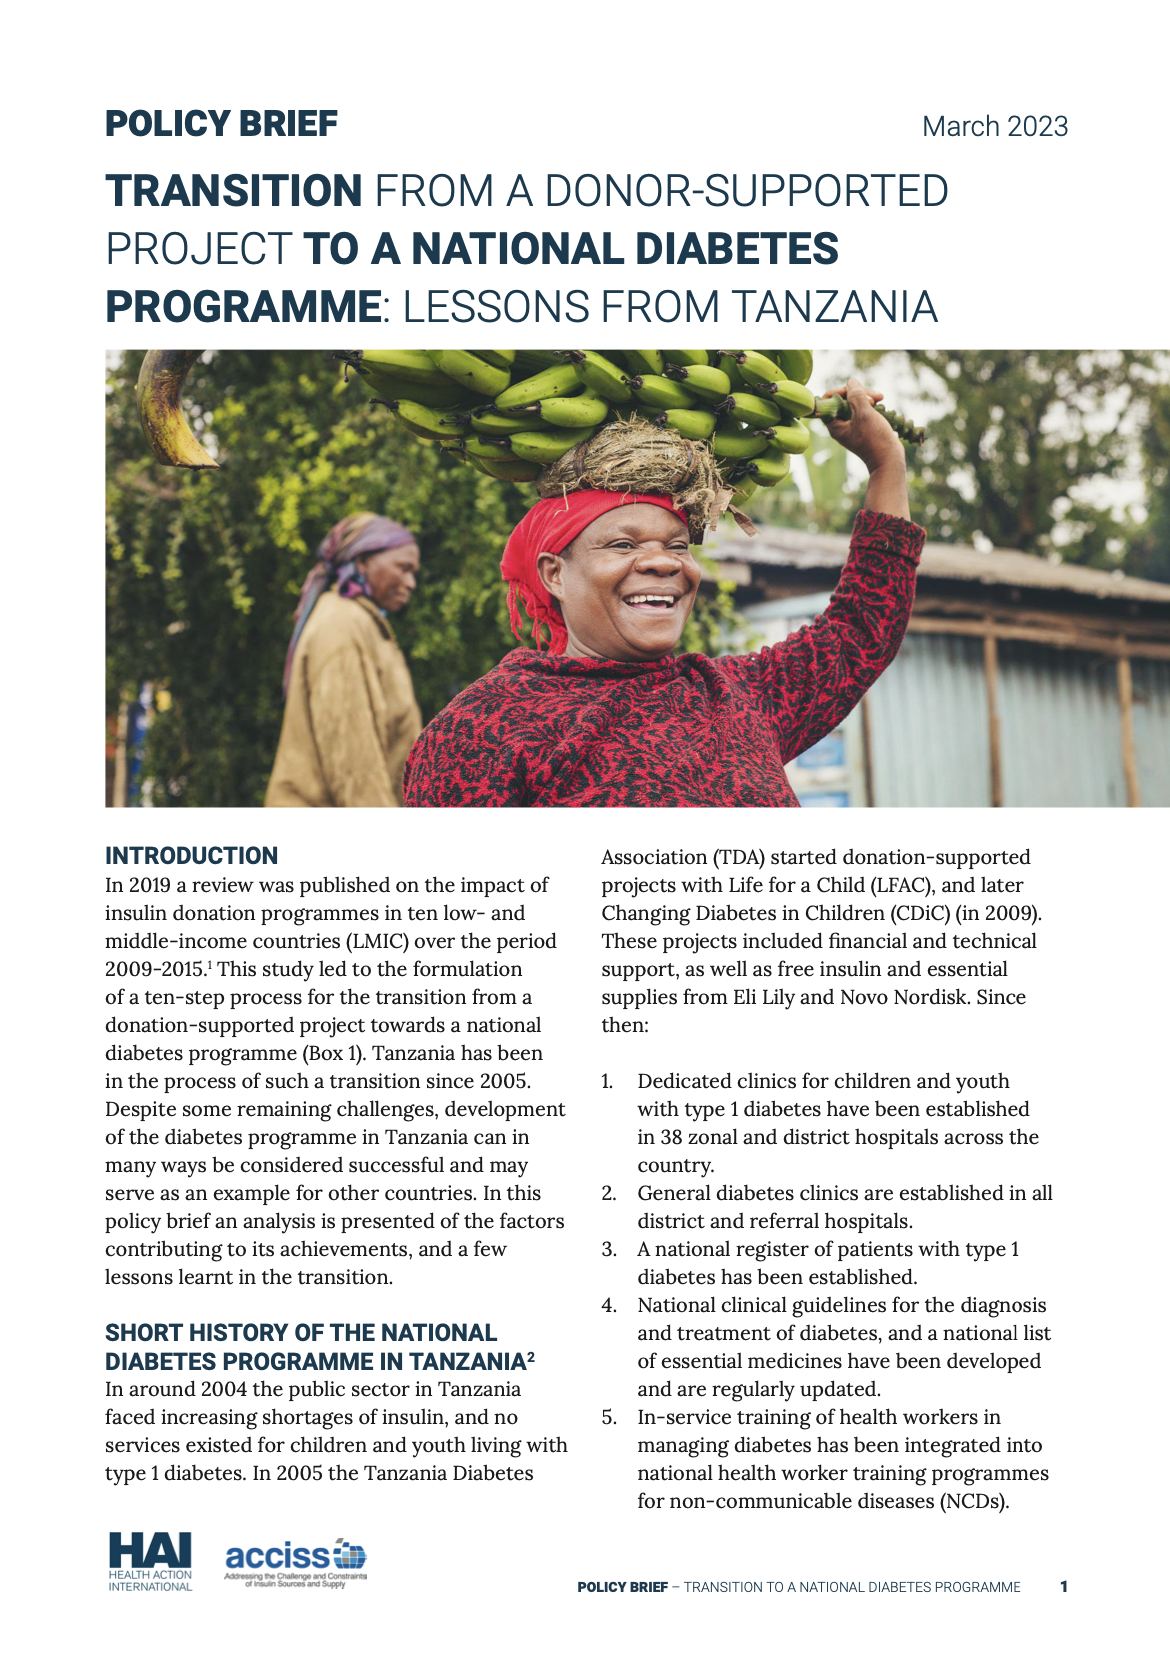 TRANSITION FROM A DONOR-SUPPORTED PROJECT TO A NATIONAL DIABETES PROGRAMME: LESSONS FROM TANZANIA